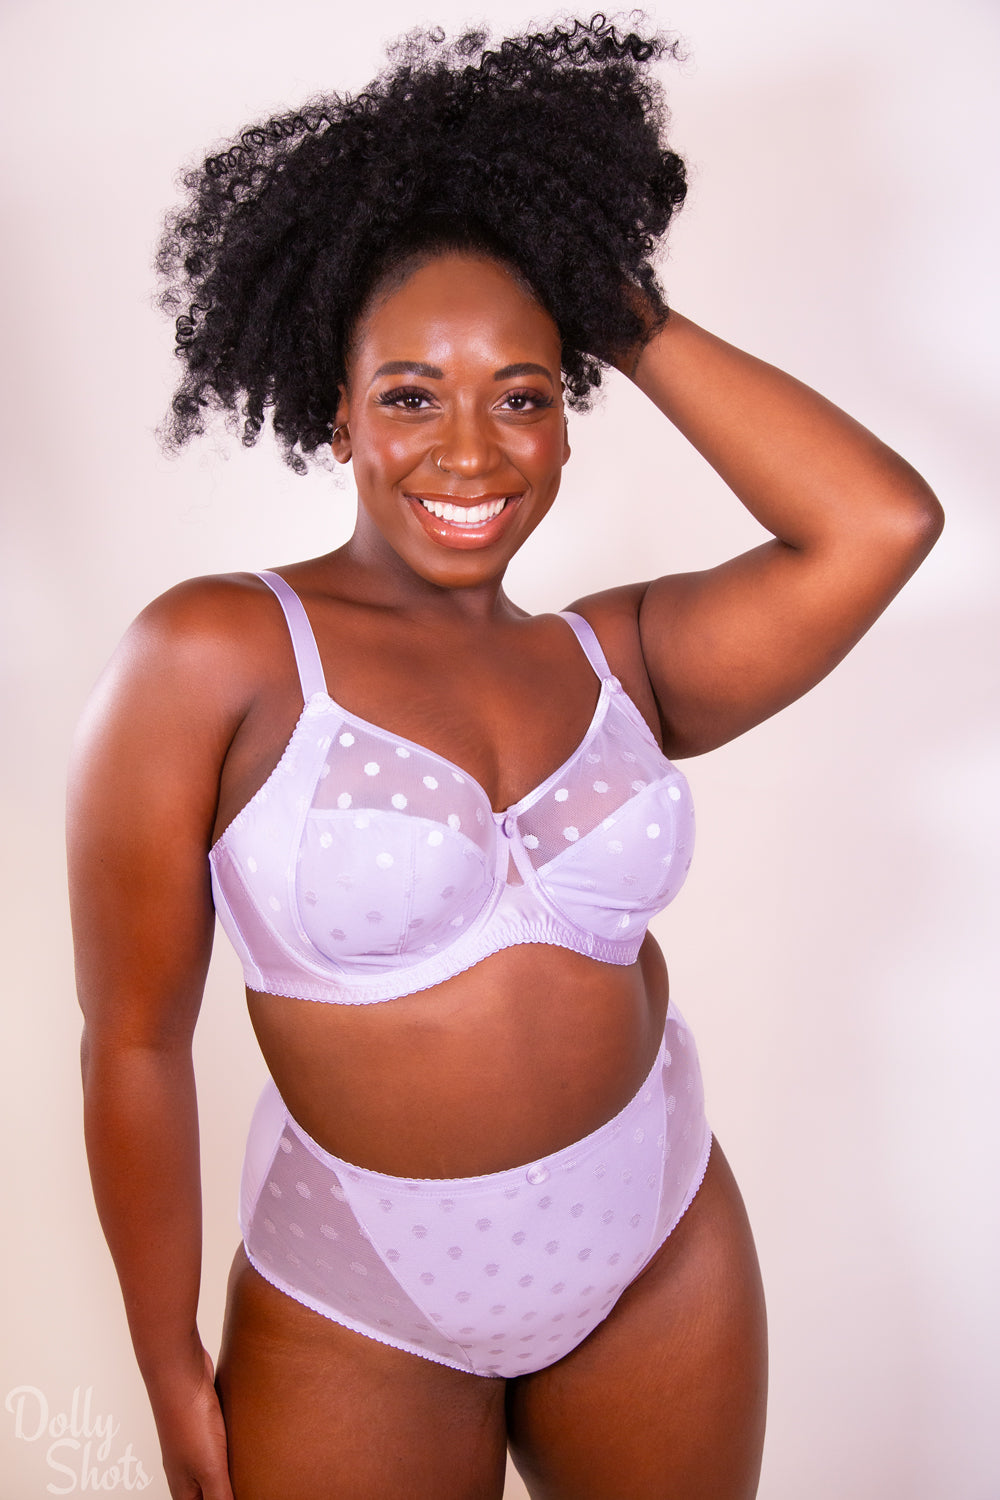 Carmen Bra By Fit Fully Yours - Full support lilac polka dot bra